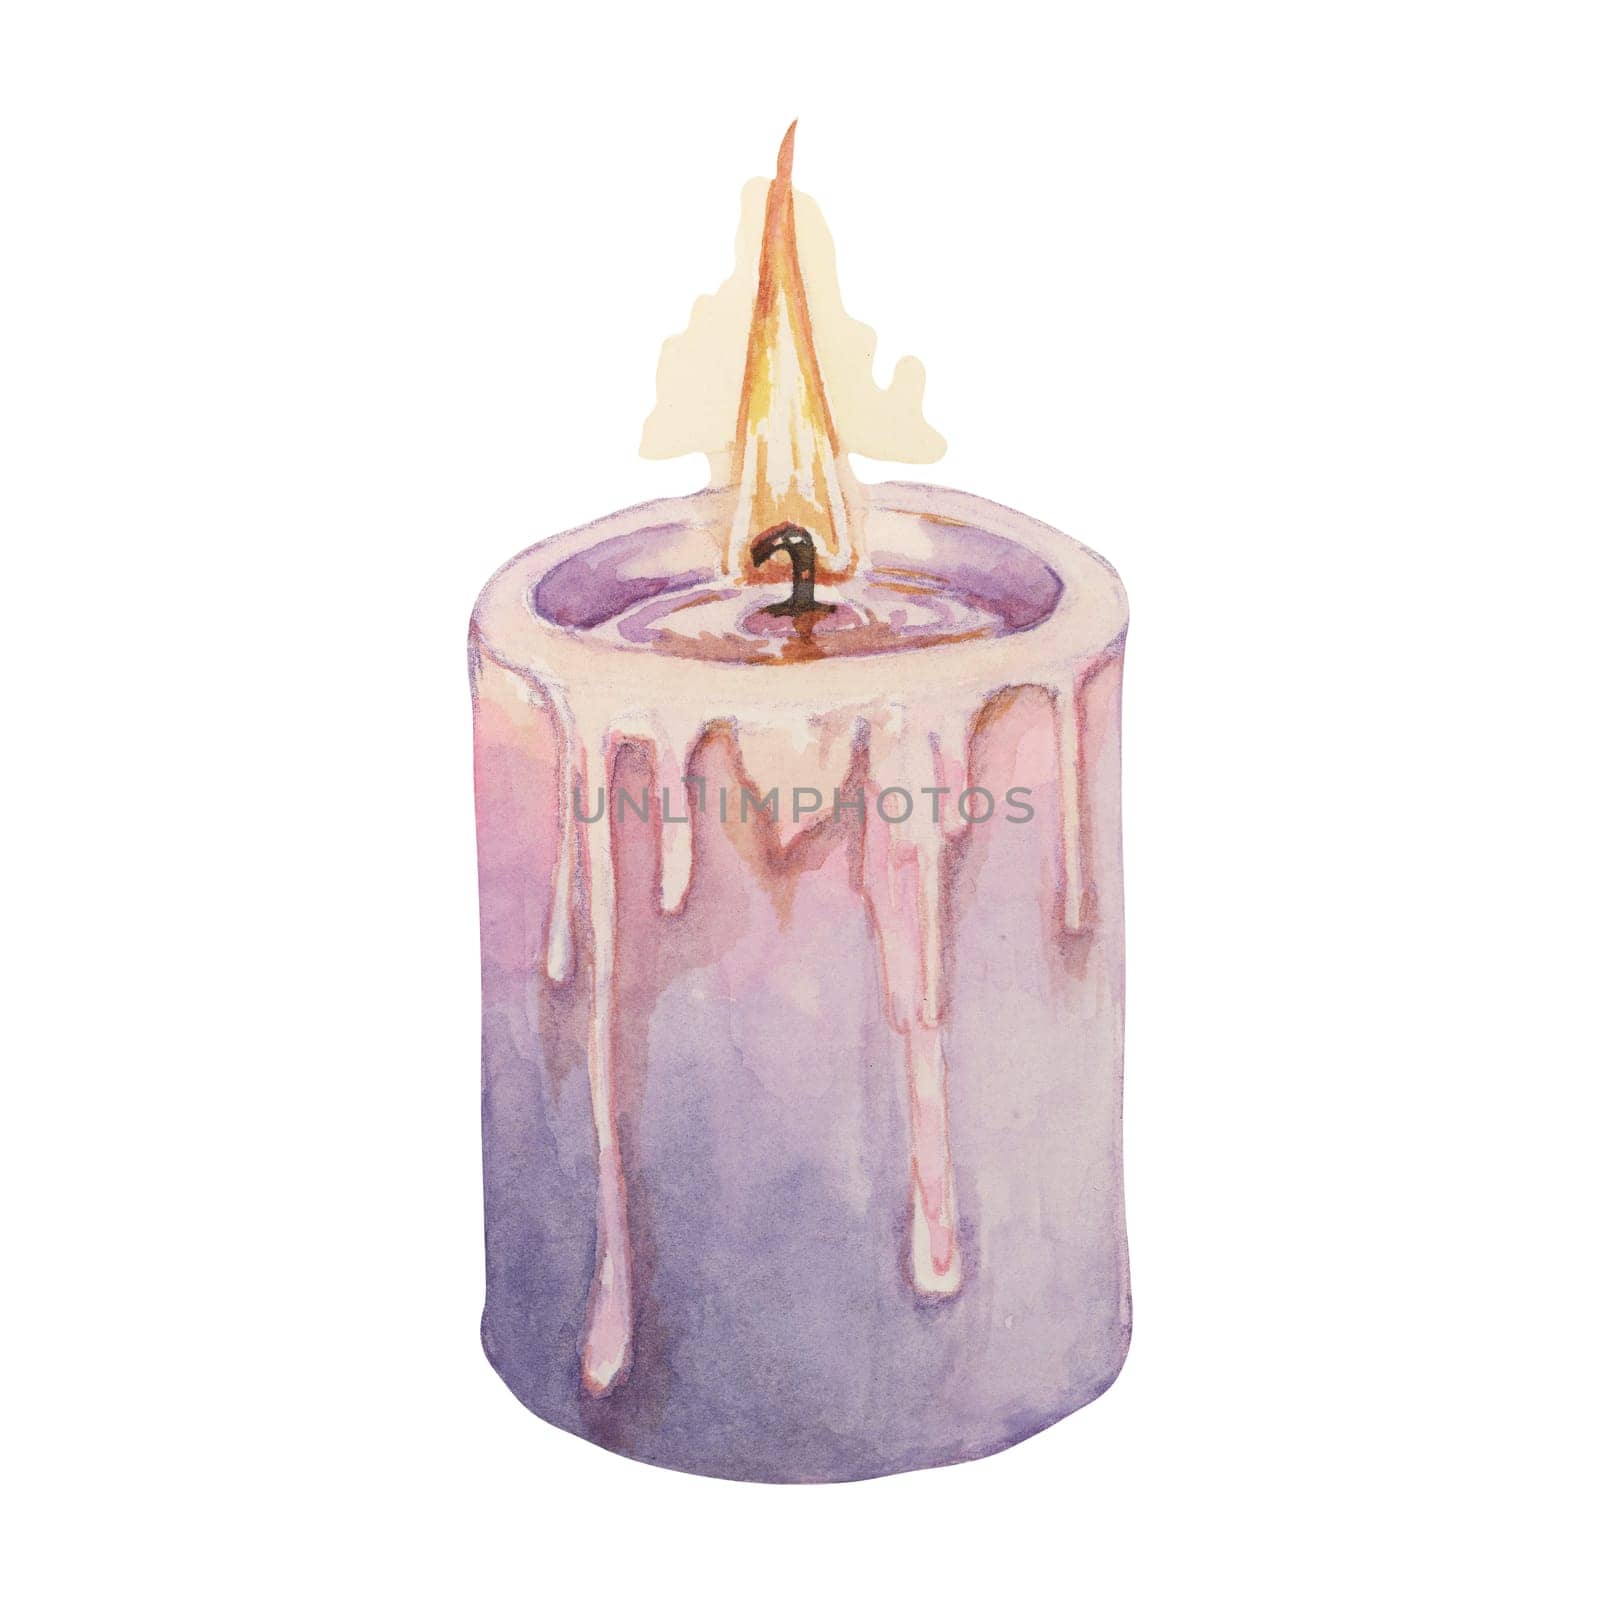 Lavender natural wax candle for home fragrance. Home spa aromatherapy relaxing watercolor illustration. Hand drawn clipart for beauty, cosmetics, labels, organic products, wellness and packaging